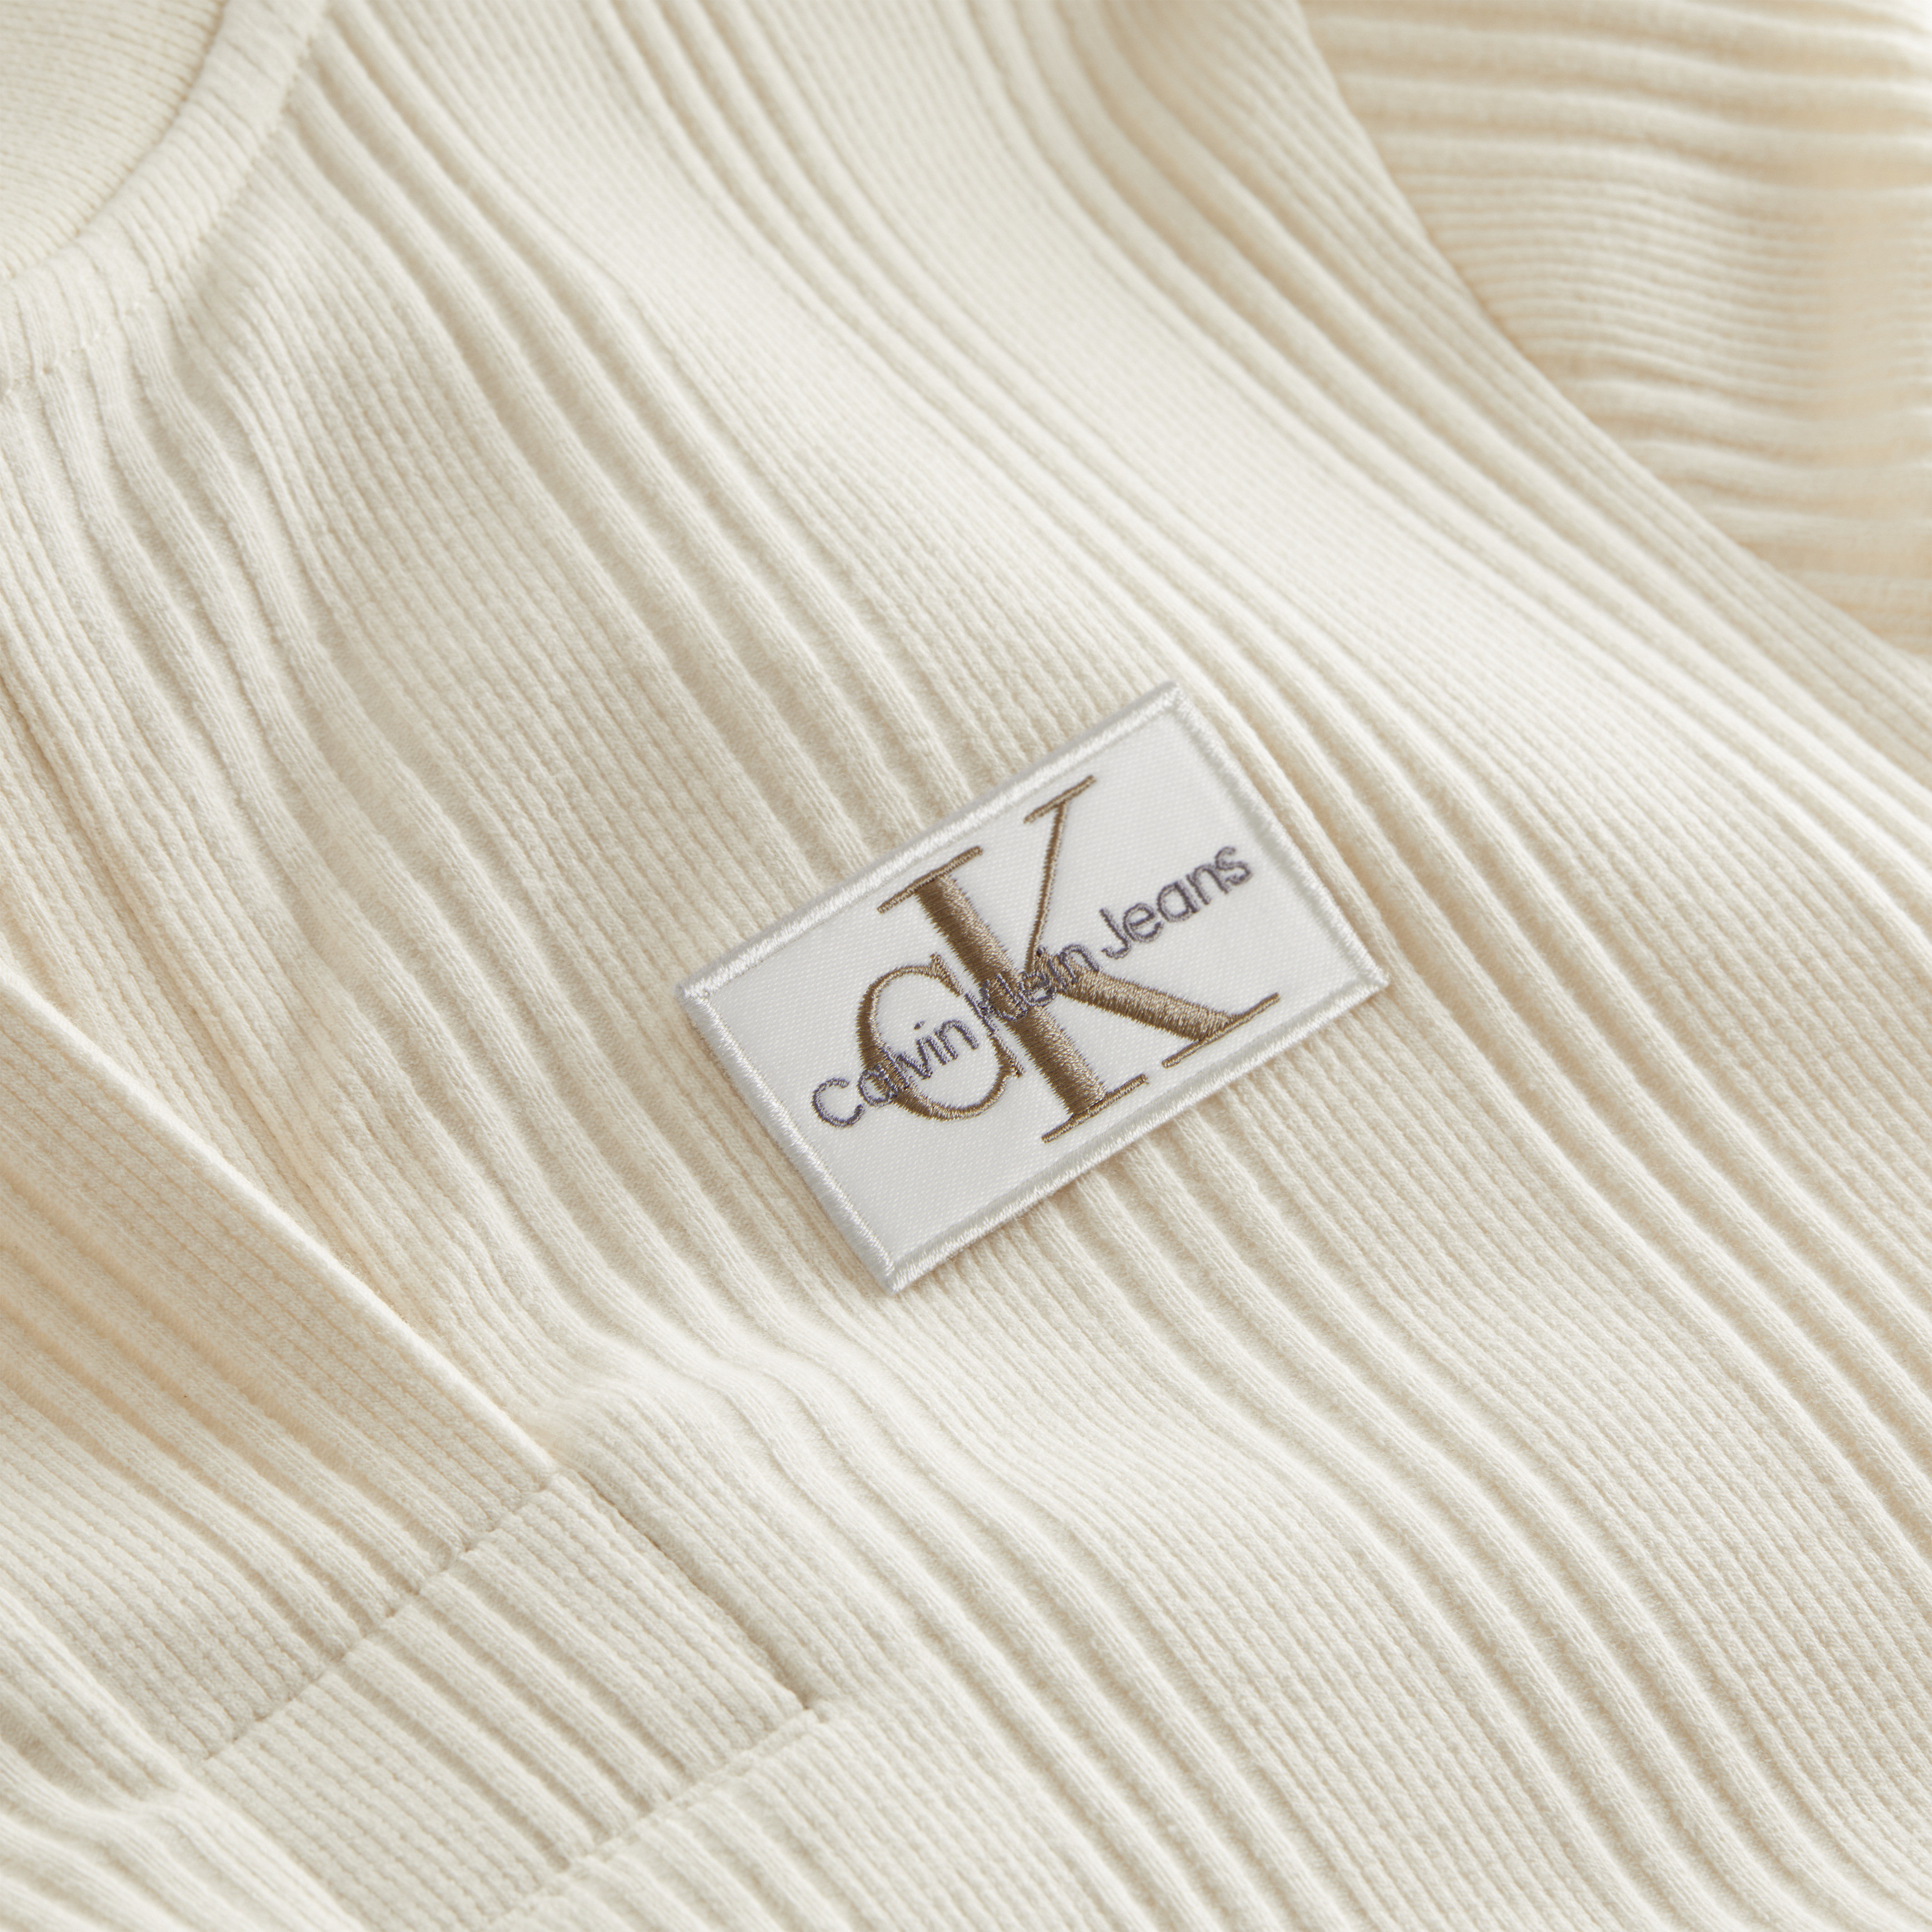 Calvin Klein Jeans - Ribbed sweater with logo, White Ivory, large image number 3